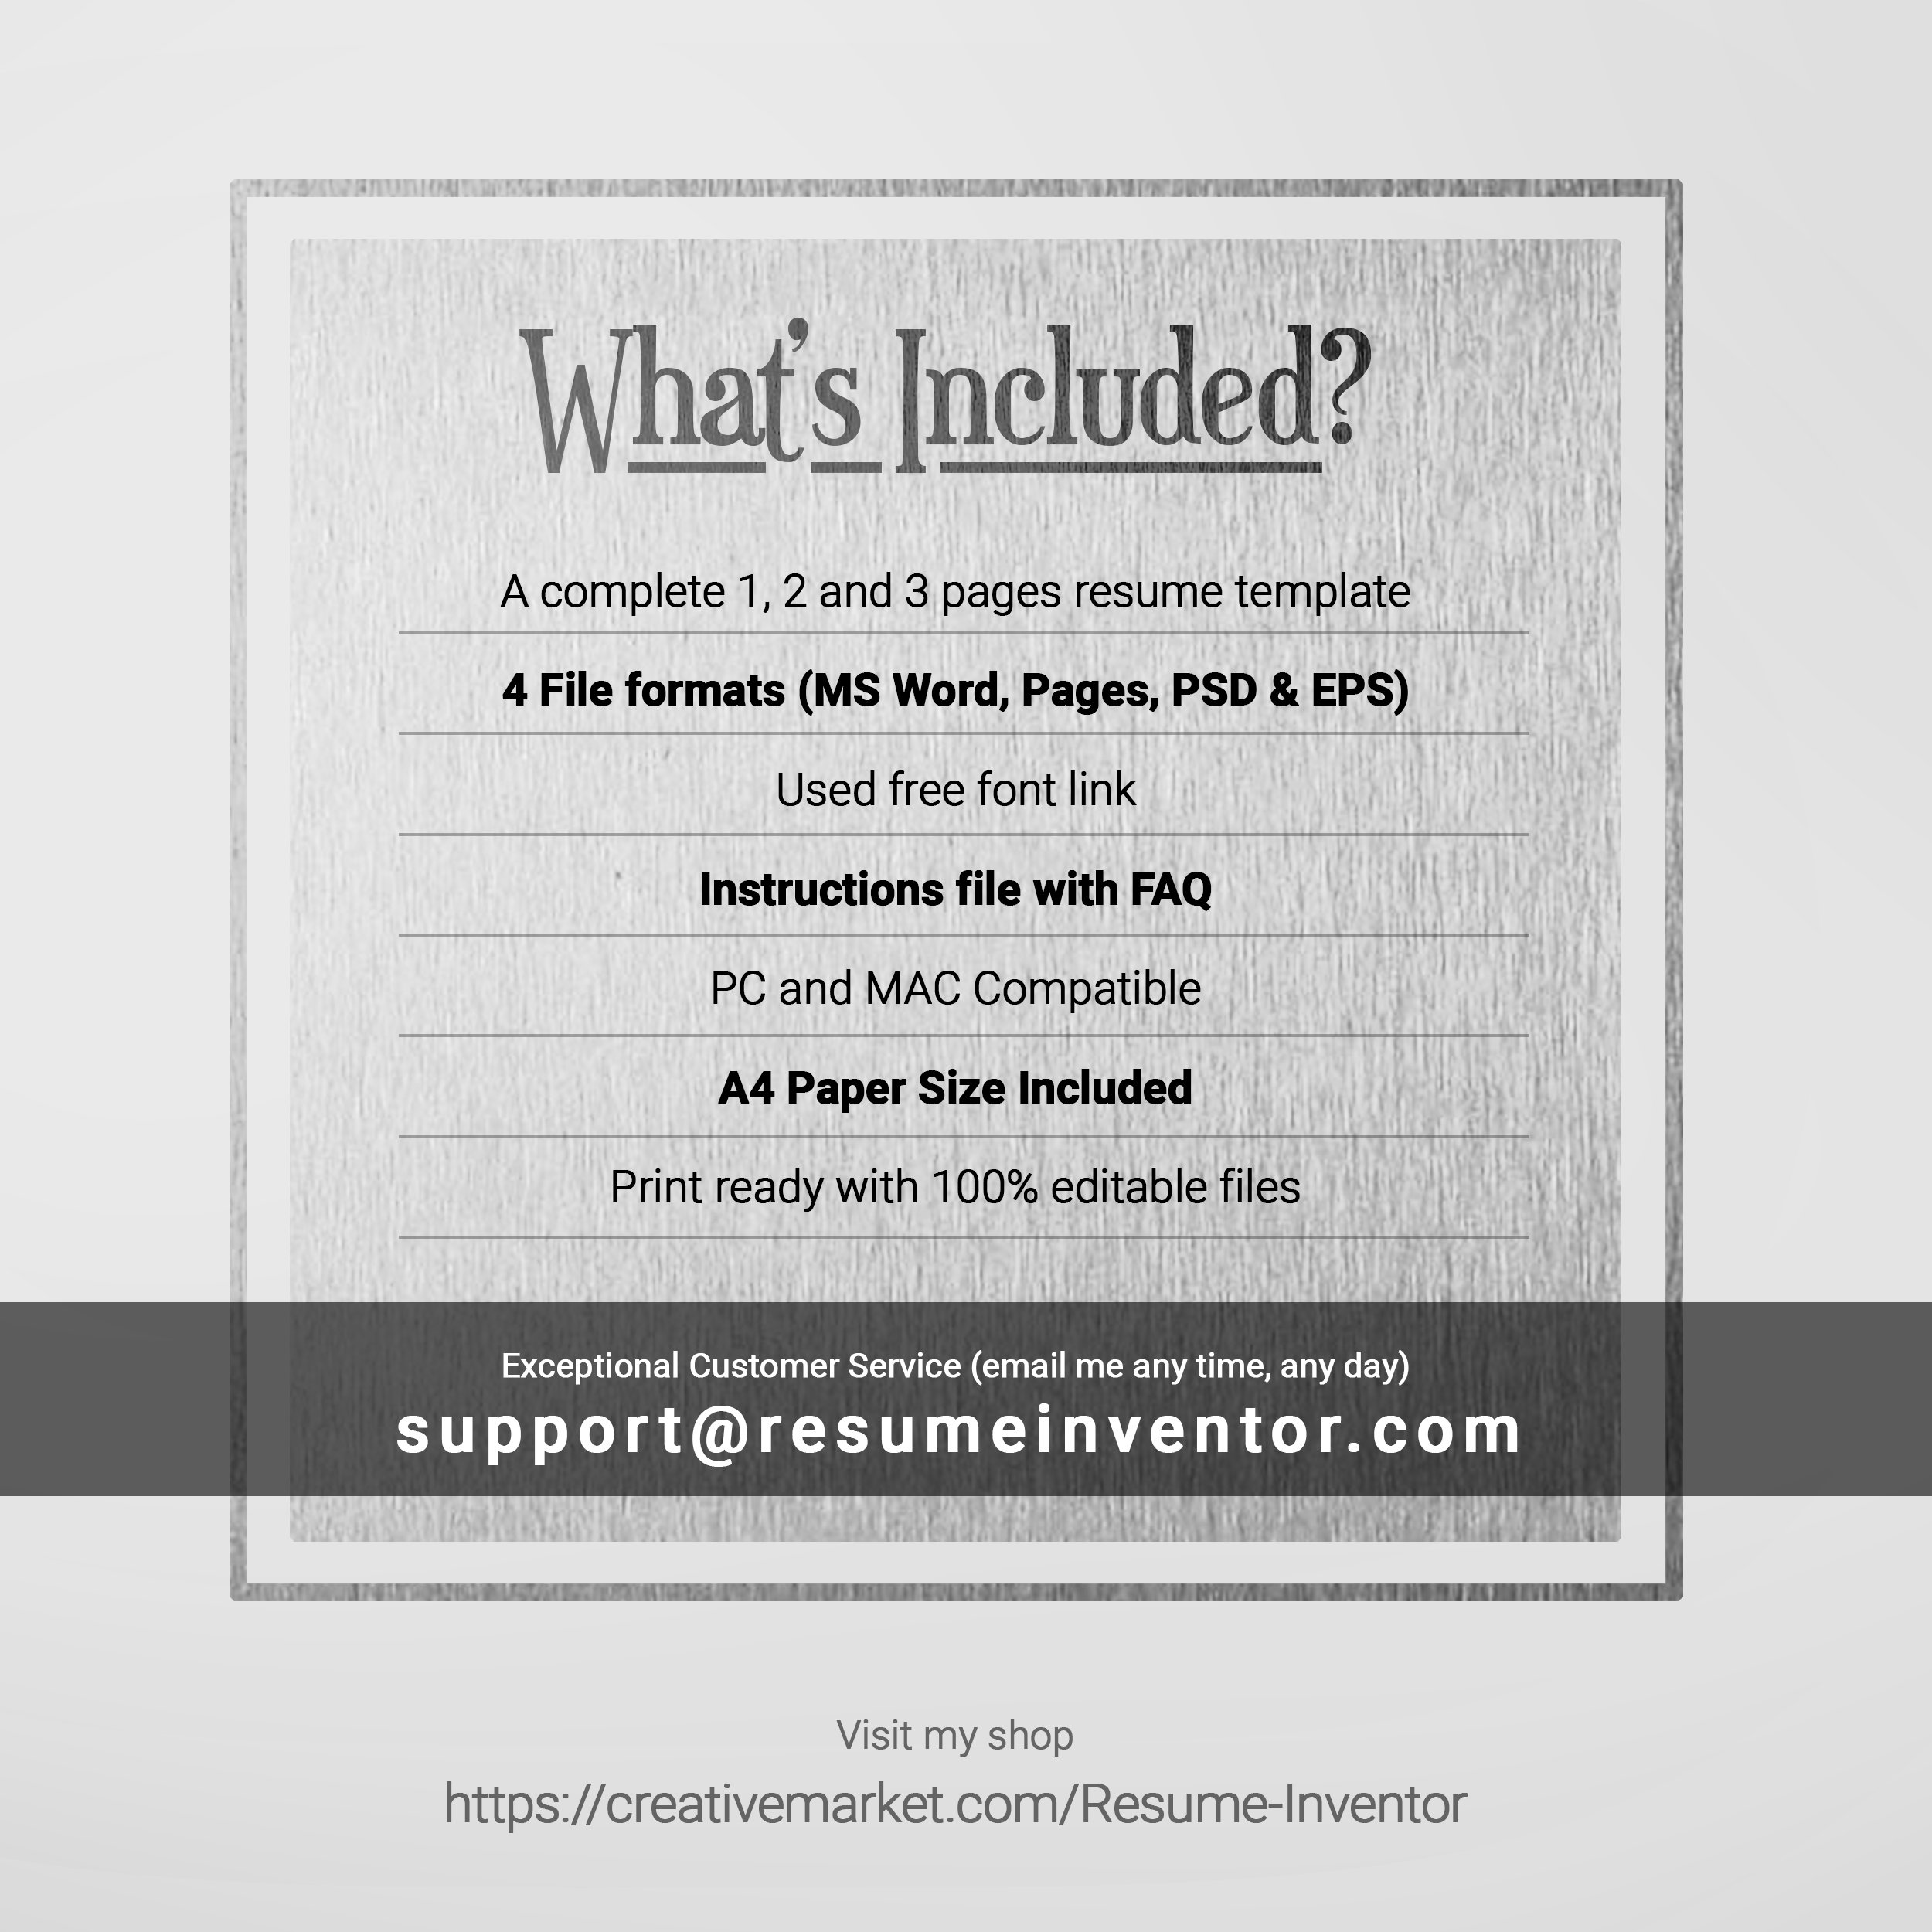 07 free resume template ms word file formats template includes 426